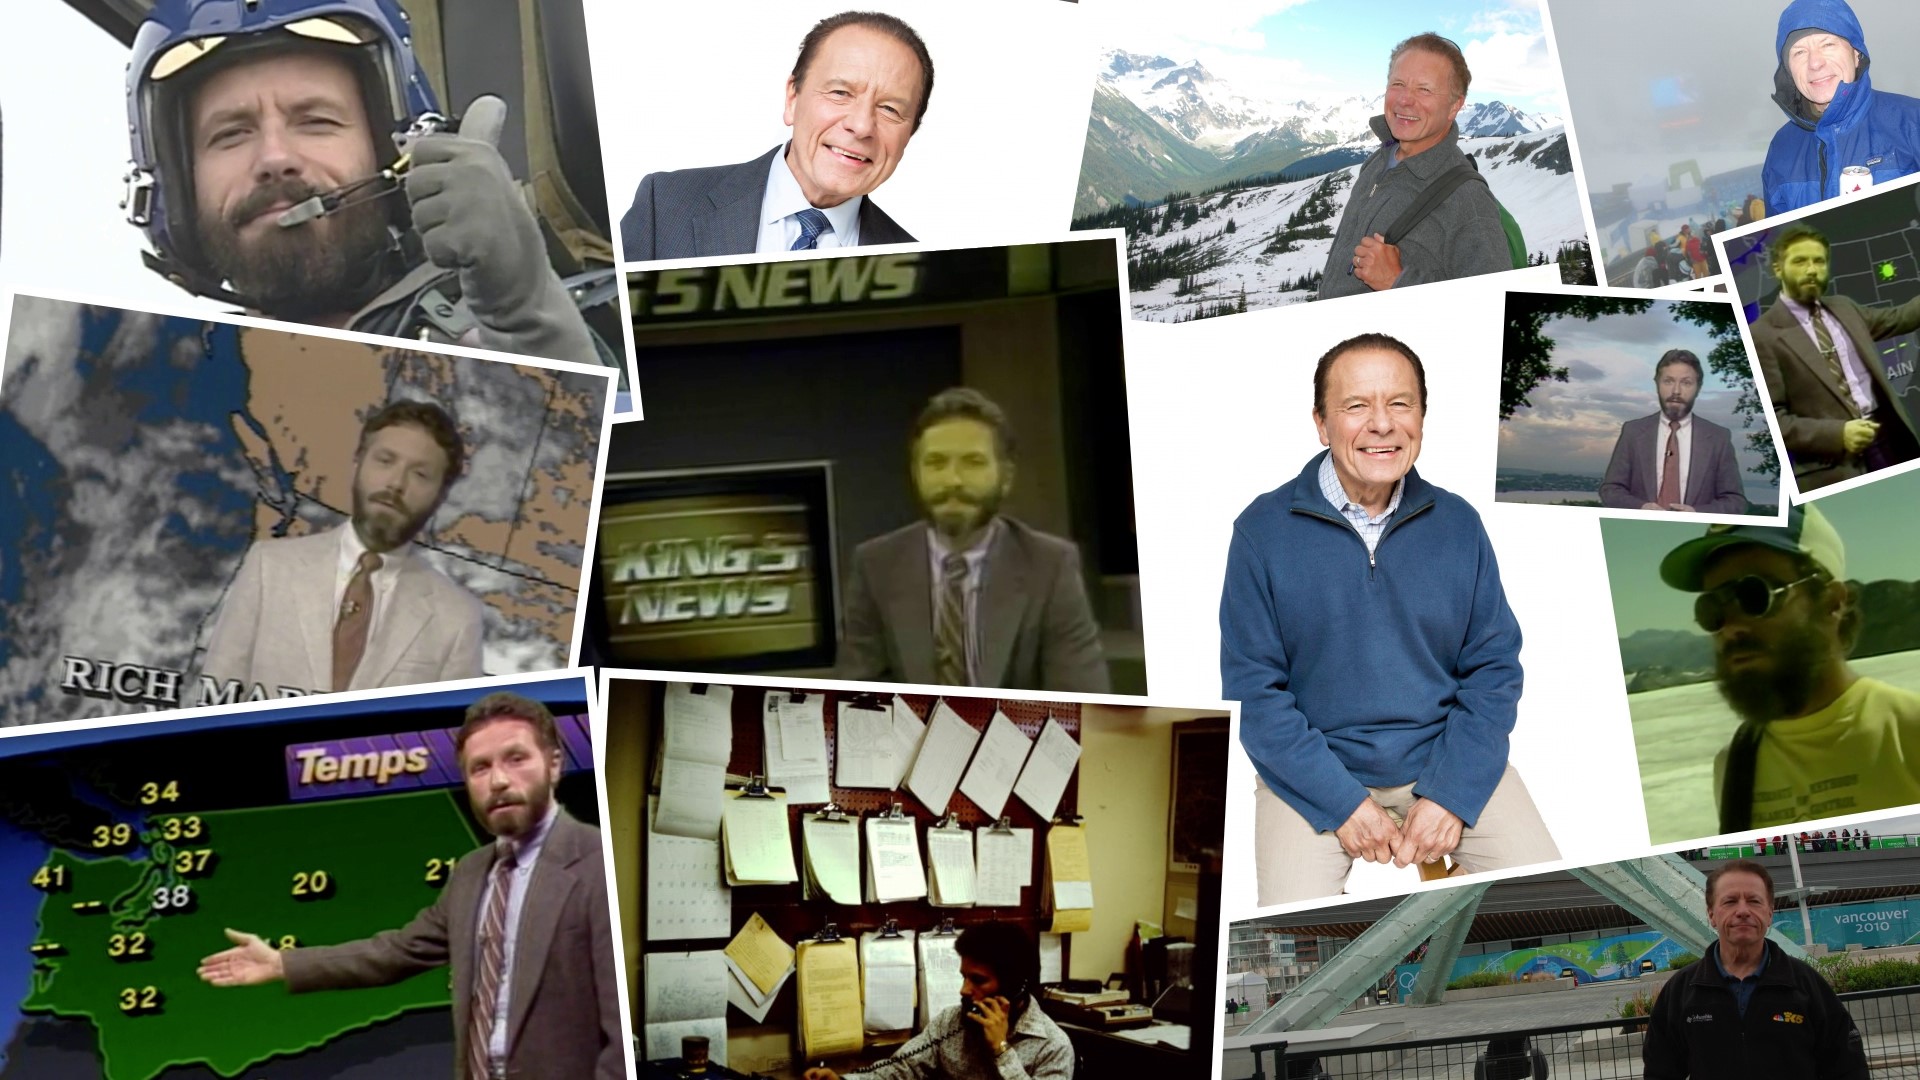 Meteorologist Rich Marriott celebrates 35 years at KING 5 on Dec. 12.